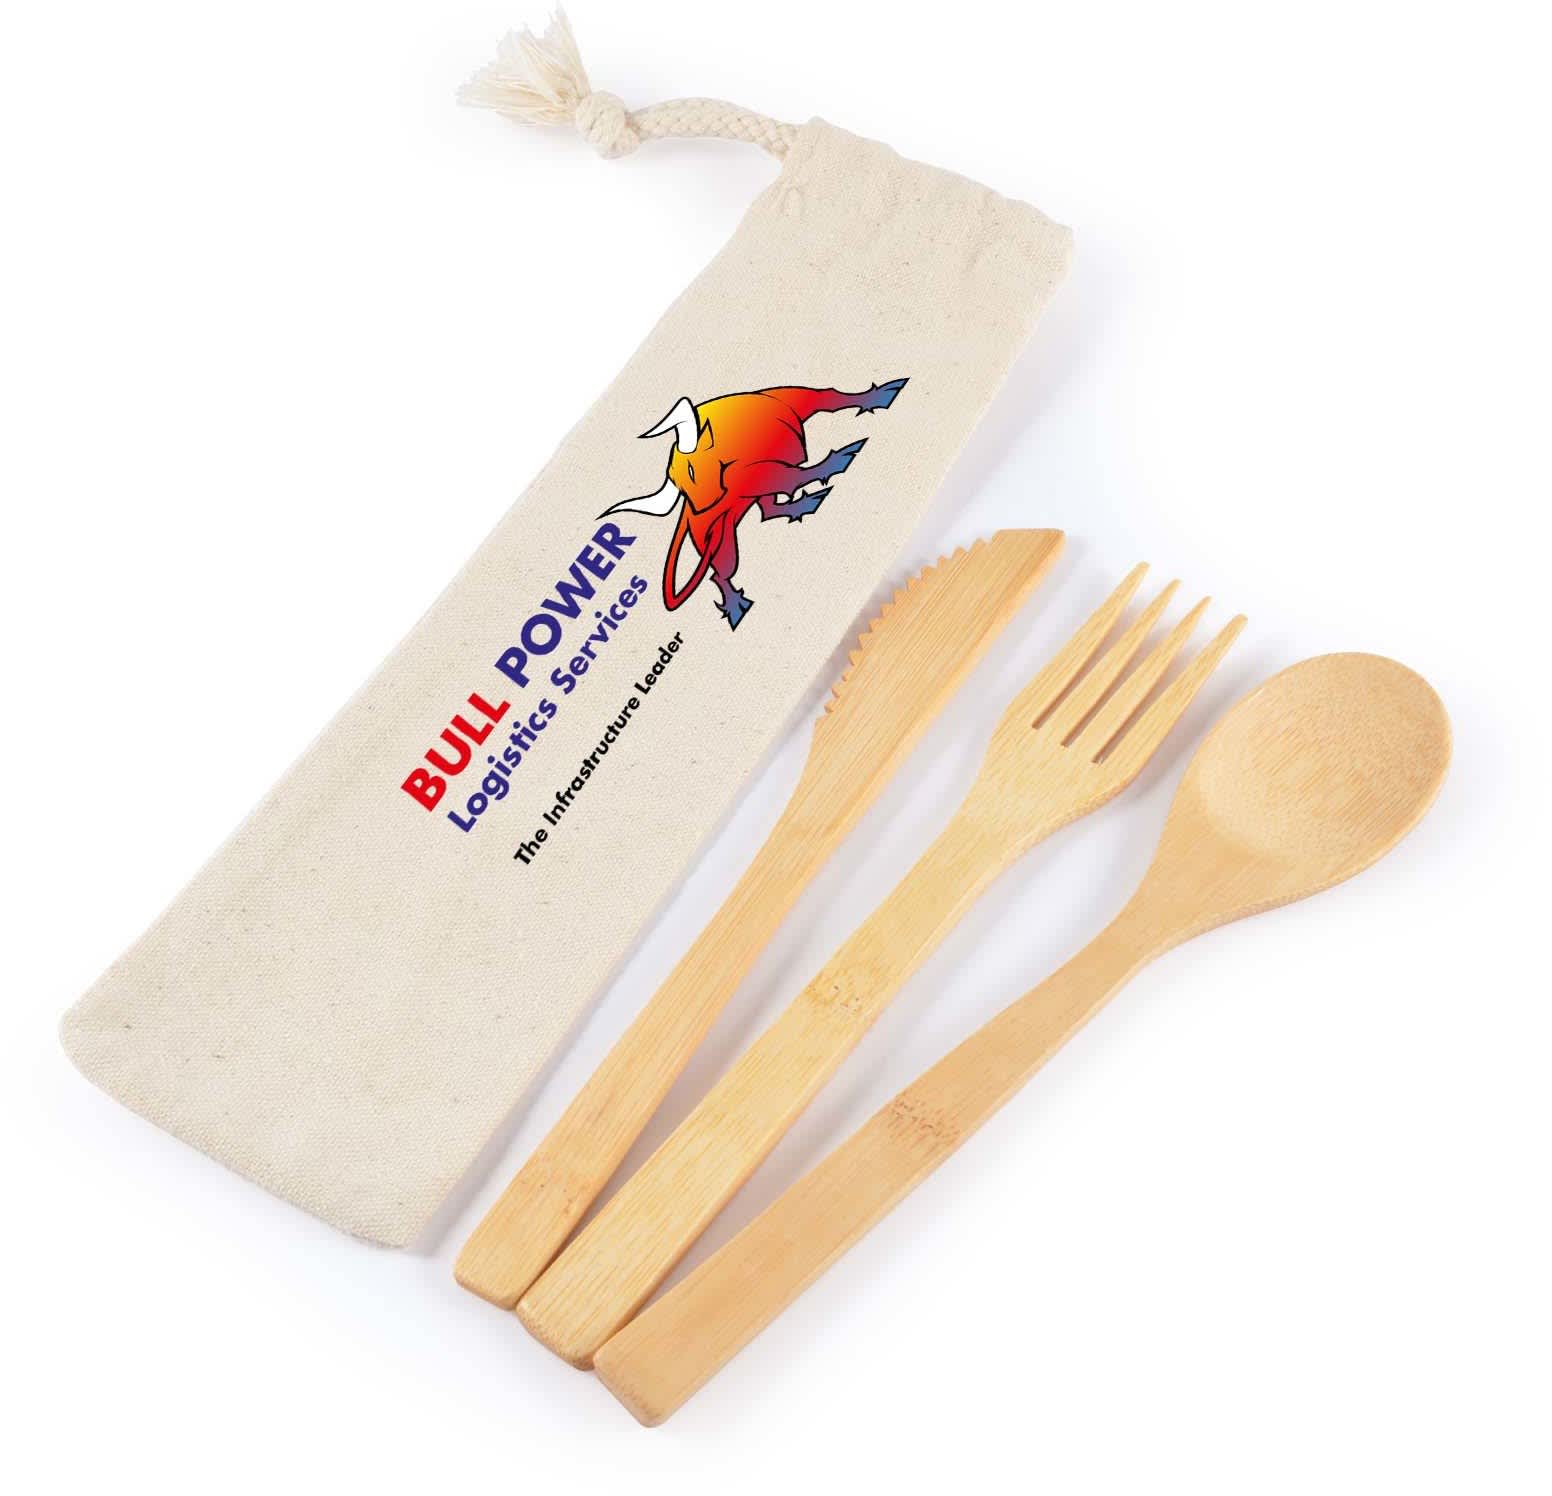 Miso Bamboo Cutlery Set in Calico Pouch